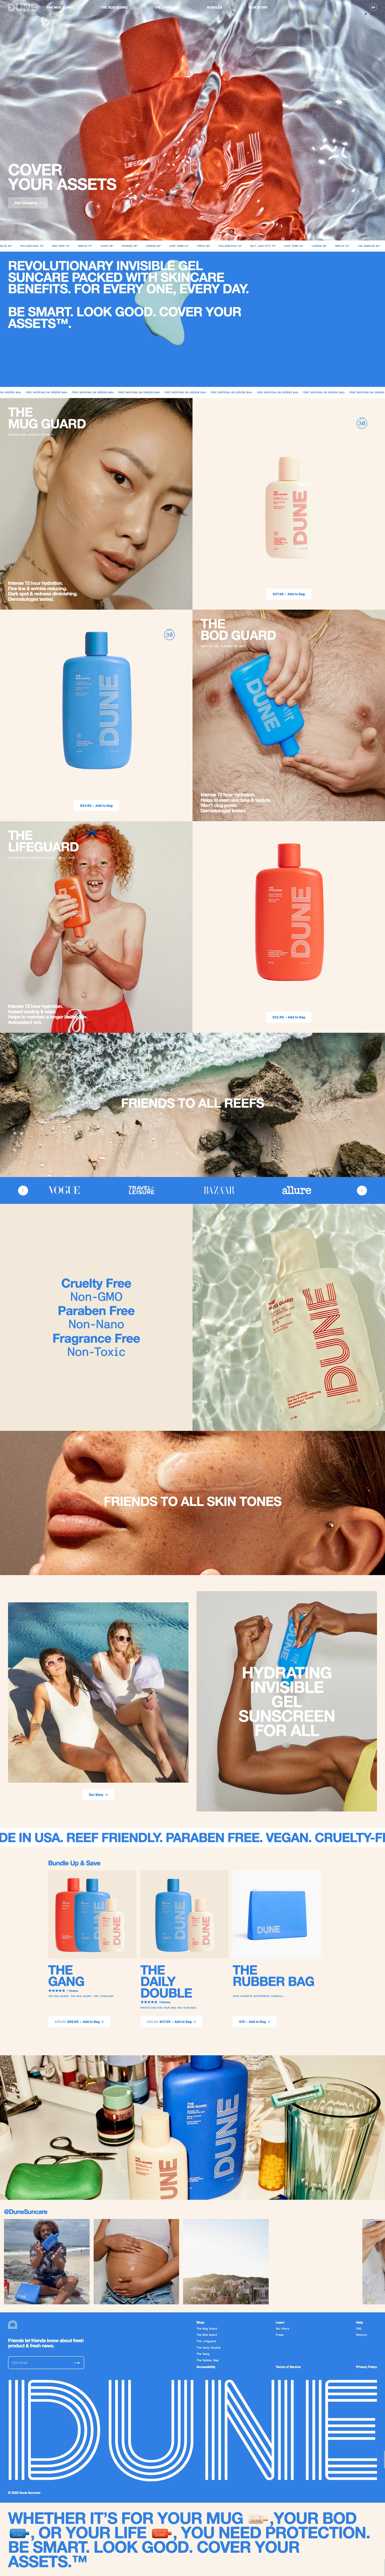 Dune Suncare Landing Page Example: Revolutionary Invisible Gel Suncare Packed With Skincare Benefits. For Every One, Every Day. Be Smart. Look Good. Cover Your Assets.